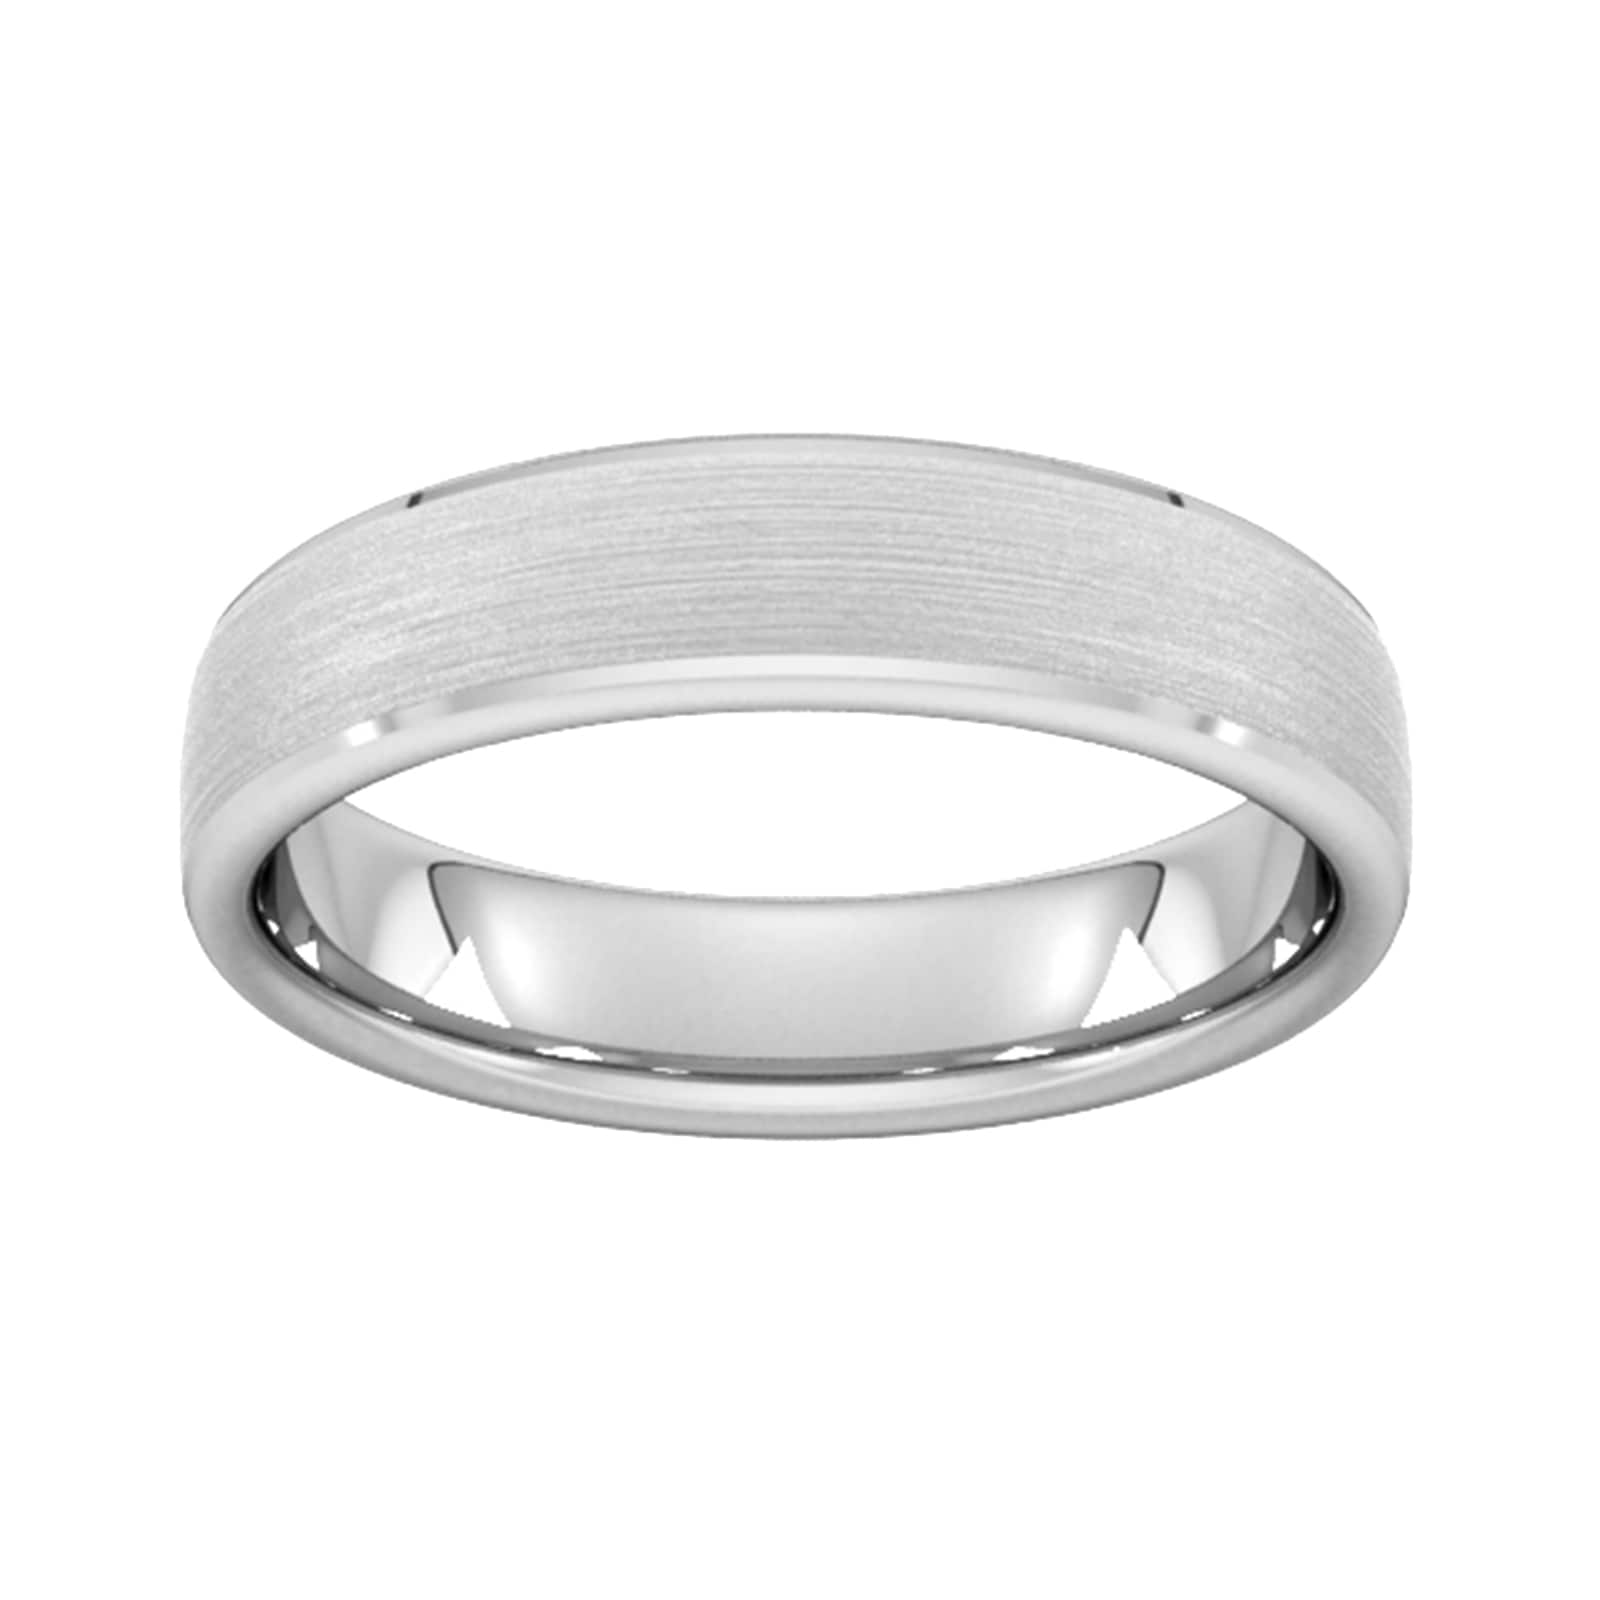 5mm Traditional Court Heavy Polished Chamfered Edges With Matt Centre Wedding Ring In 9 Carat White Gold - Ring Size H